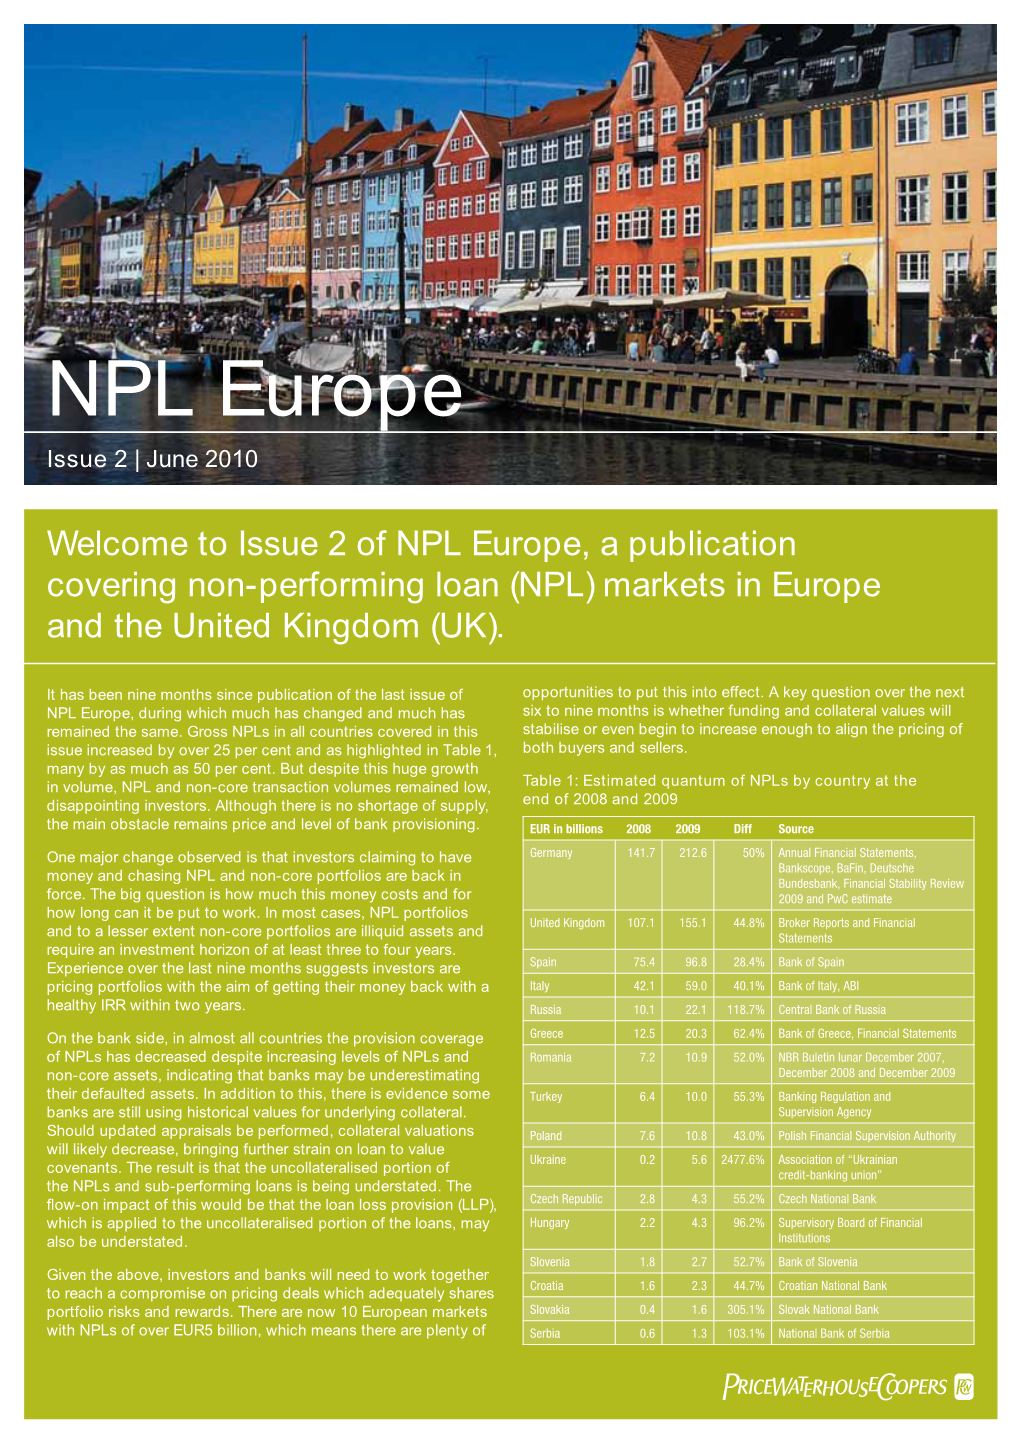 Issue 2 of NPL Europe, a Publication Covering Non-Performing Loan (NPL) Markets in Europe and the United Kingdom (UK)